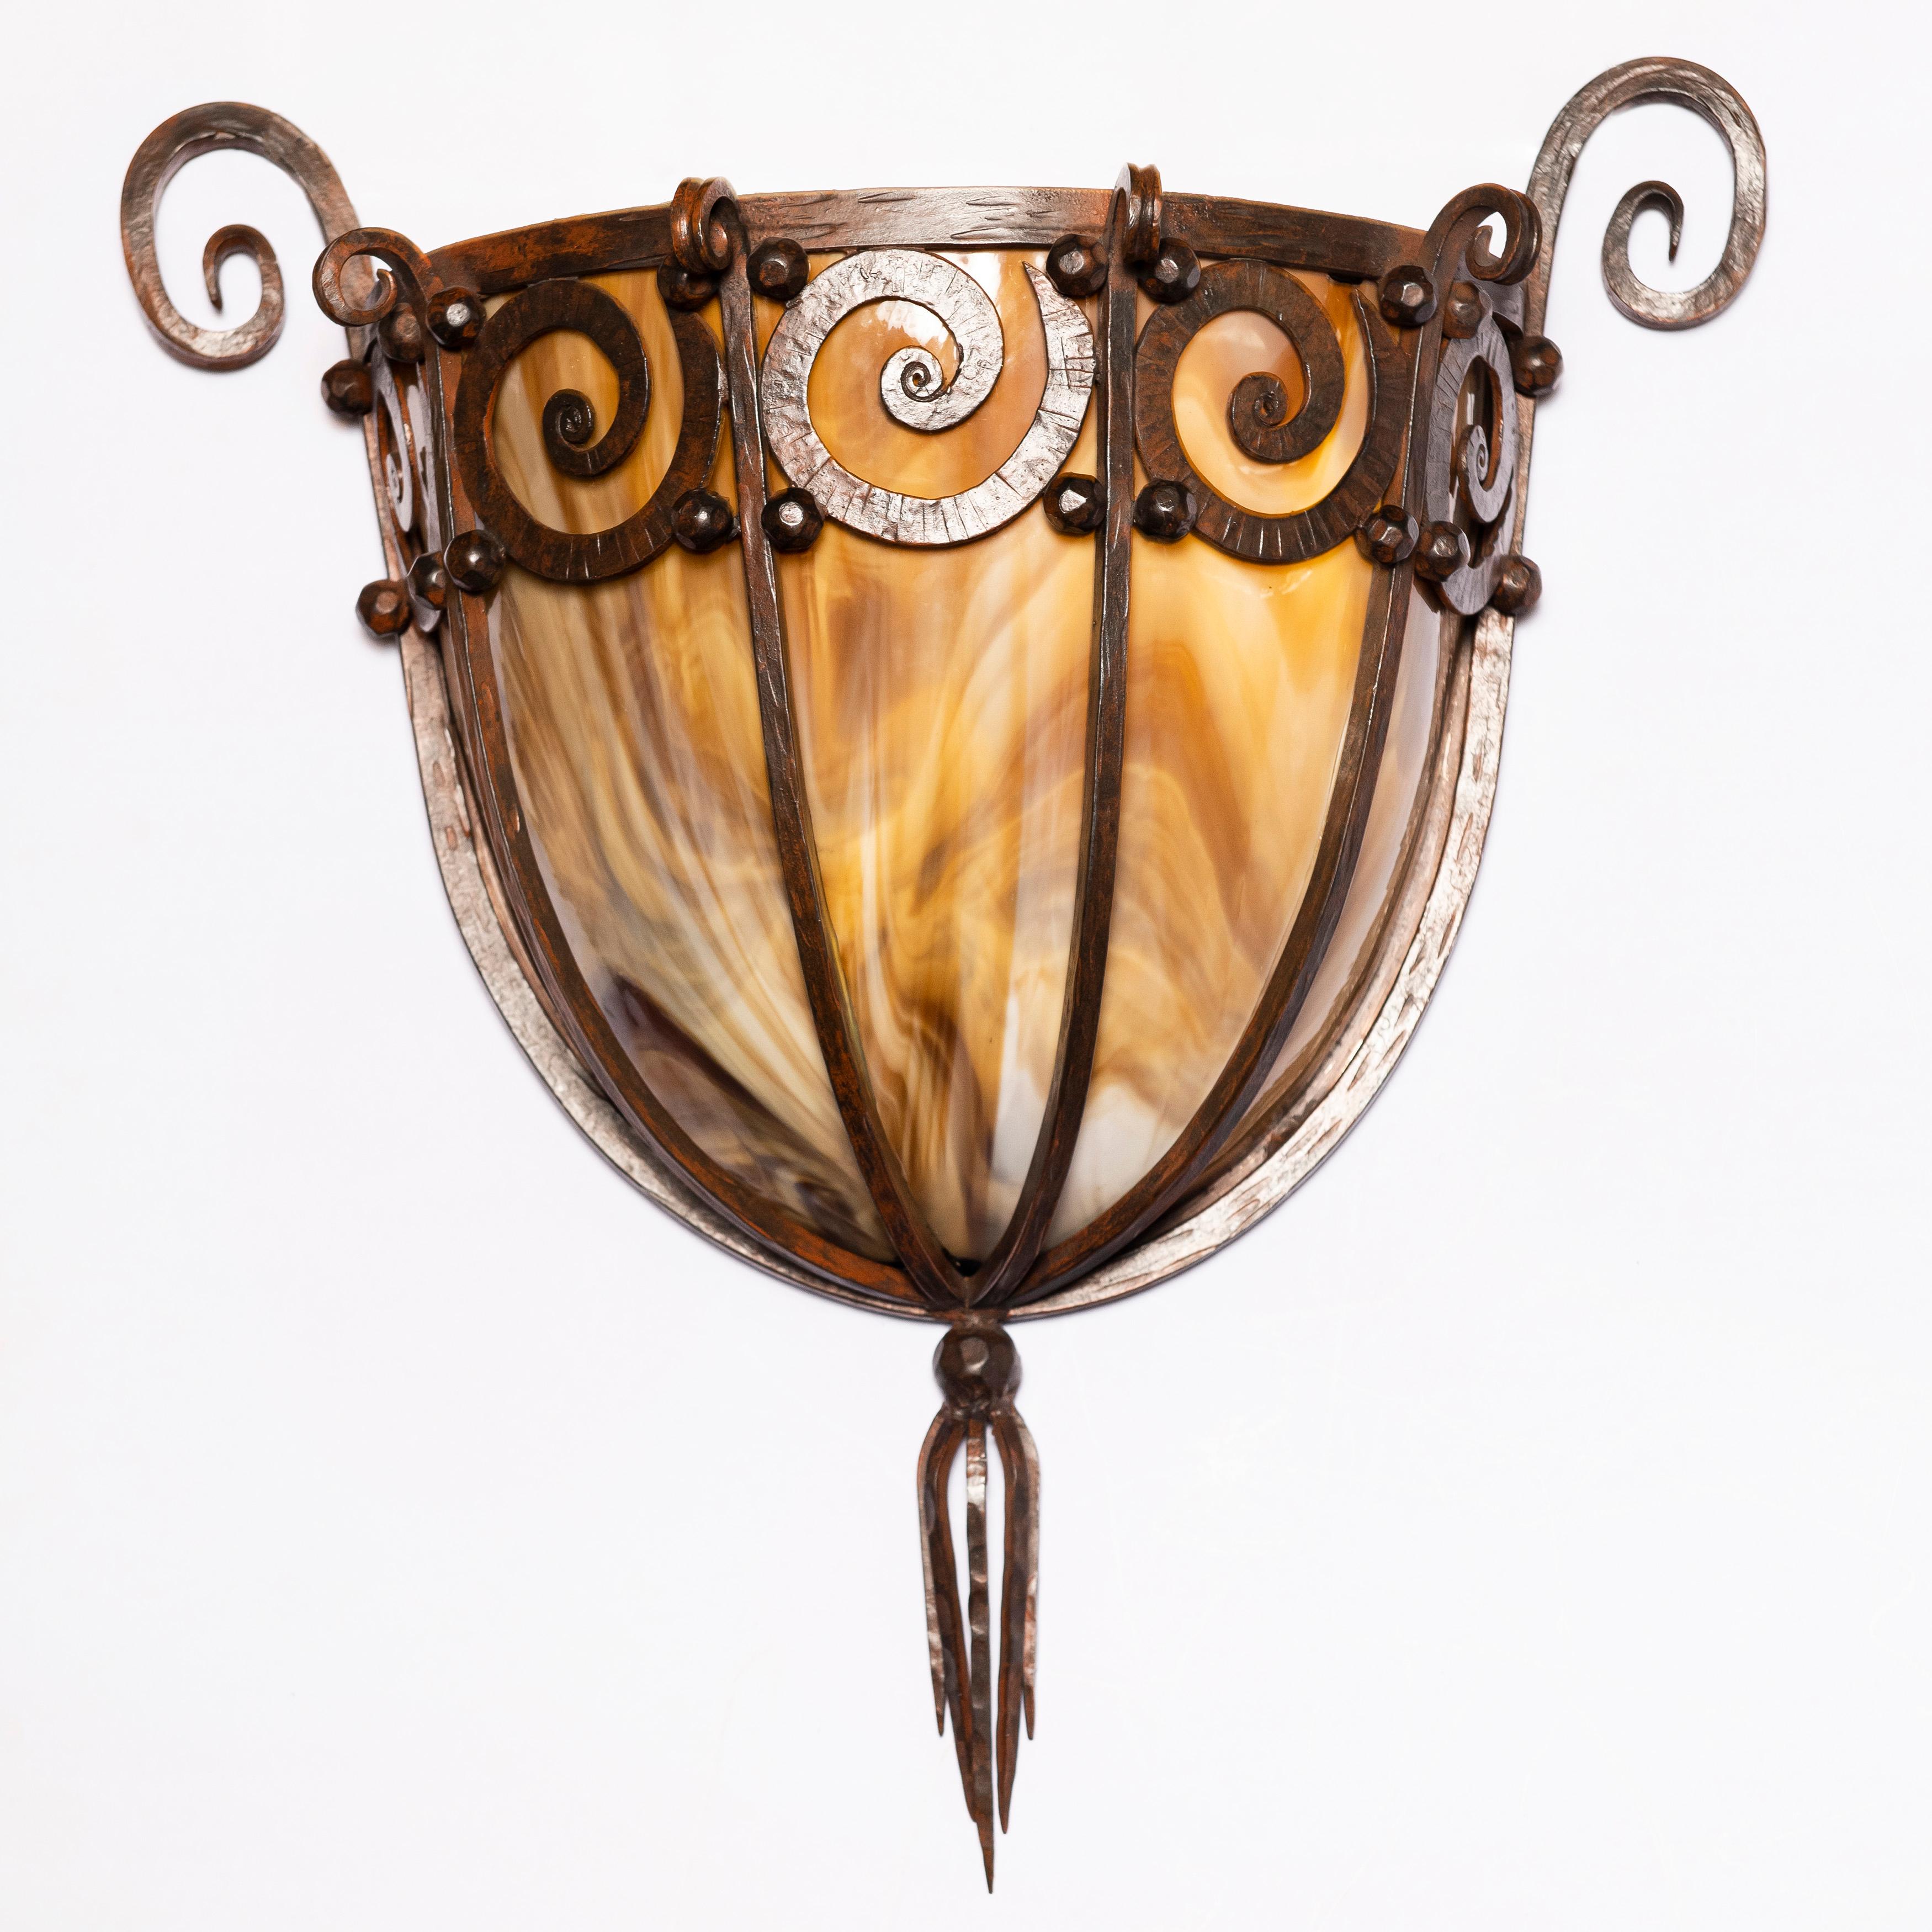 Pair of slag glass and wrought iron sconces, France, circa 1930.